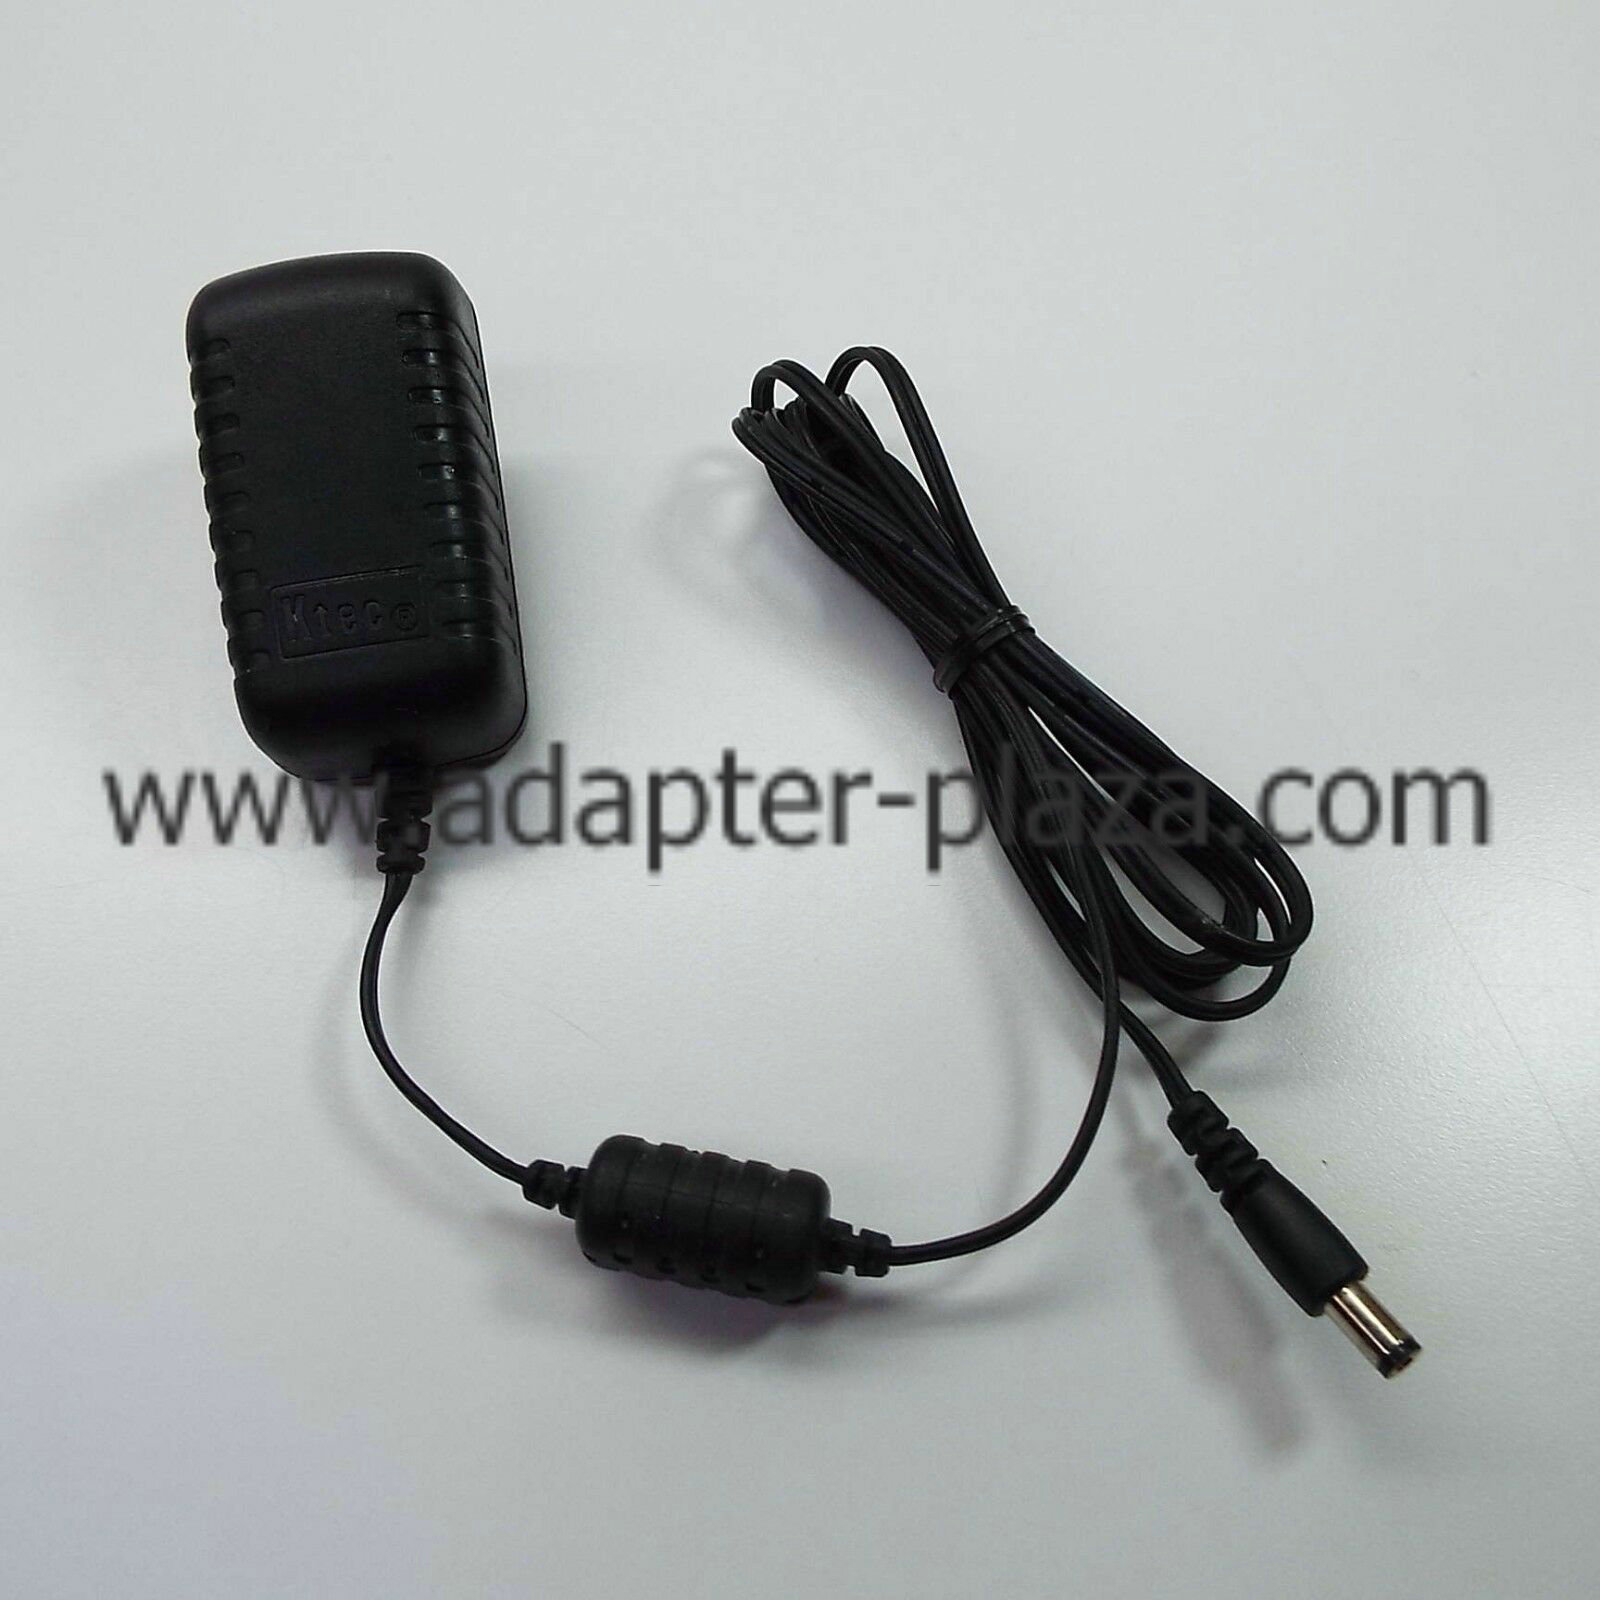 *Brand NEW* CHIP PC 5.0V 2.0A KSAC05000200W1US AC DC Adapter POWER SUPPLY